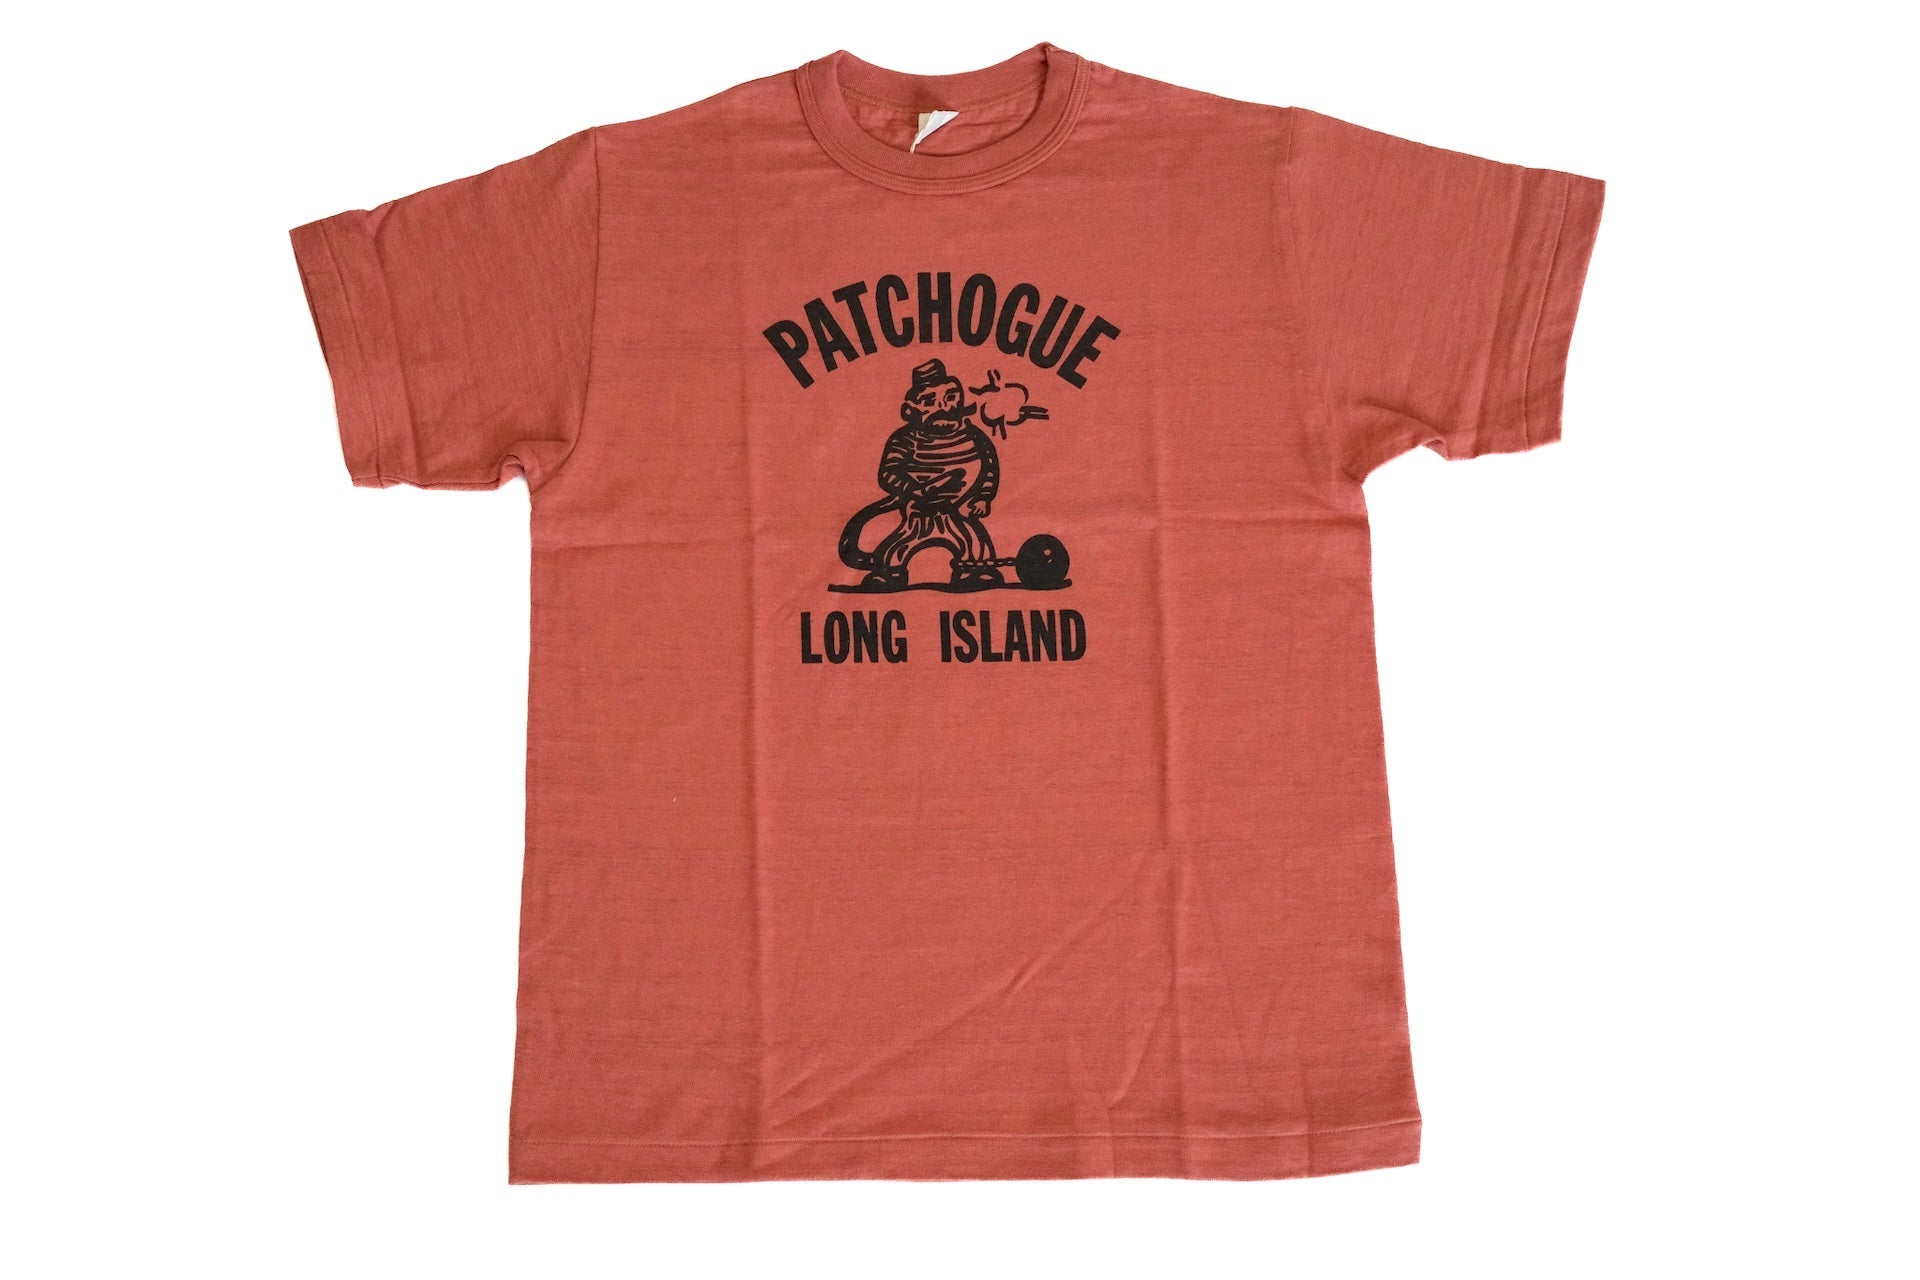 Warehouse "Patchogue" 'Bamboo Textured' Tee (Salmon)